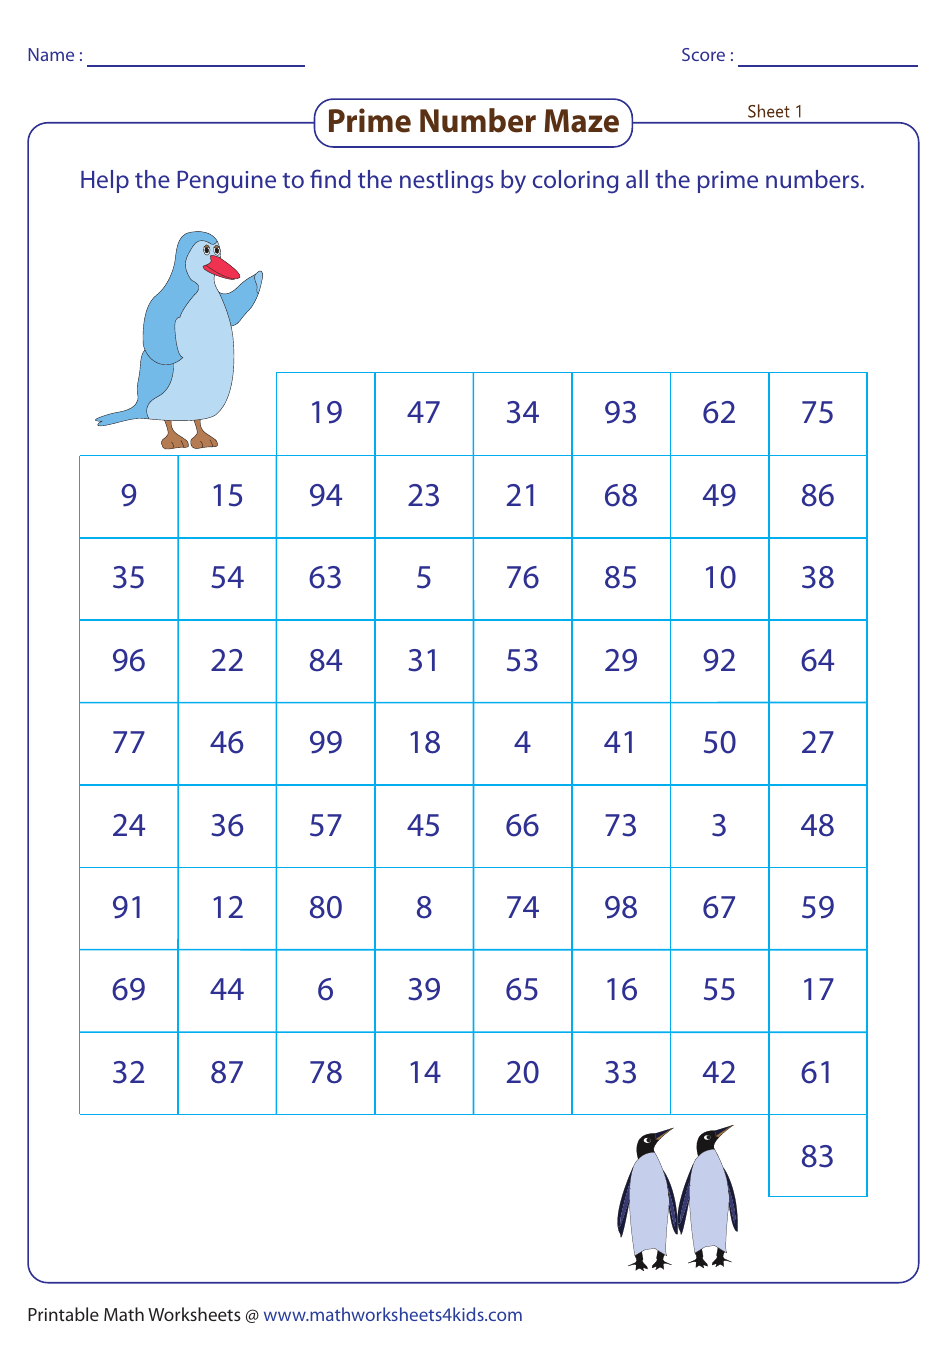 prime number maze worksheet with answer key download